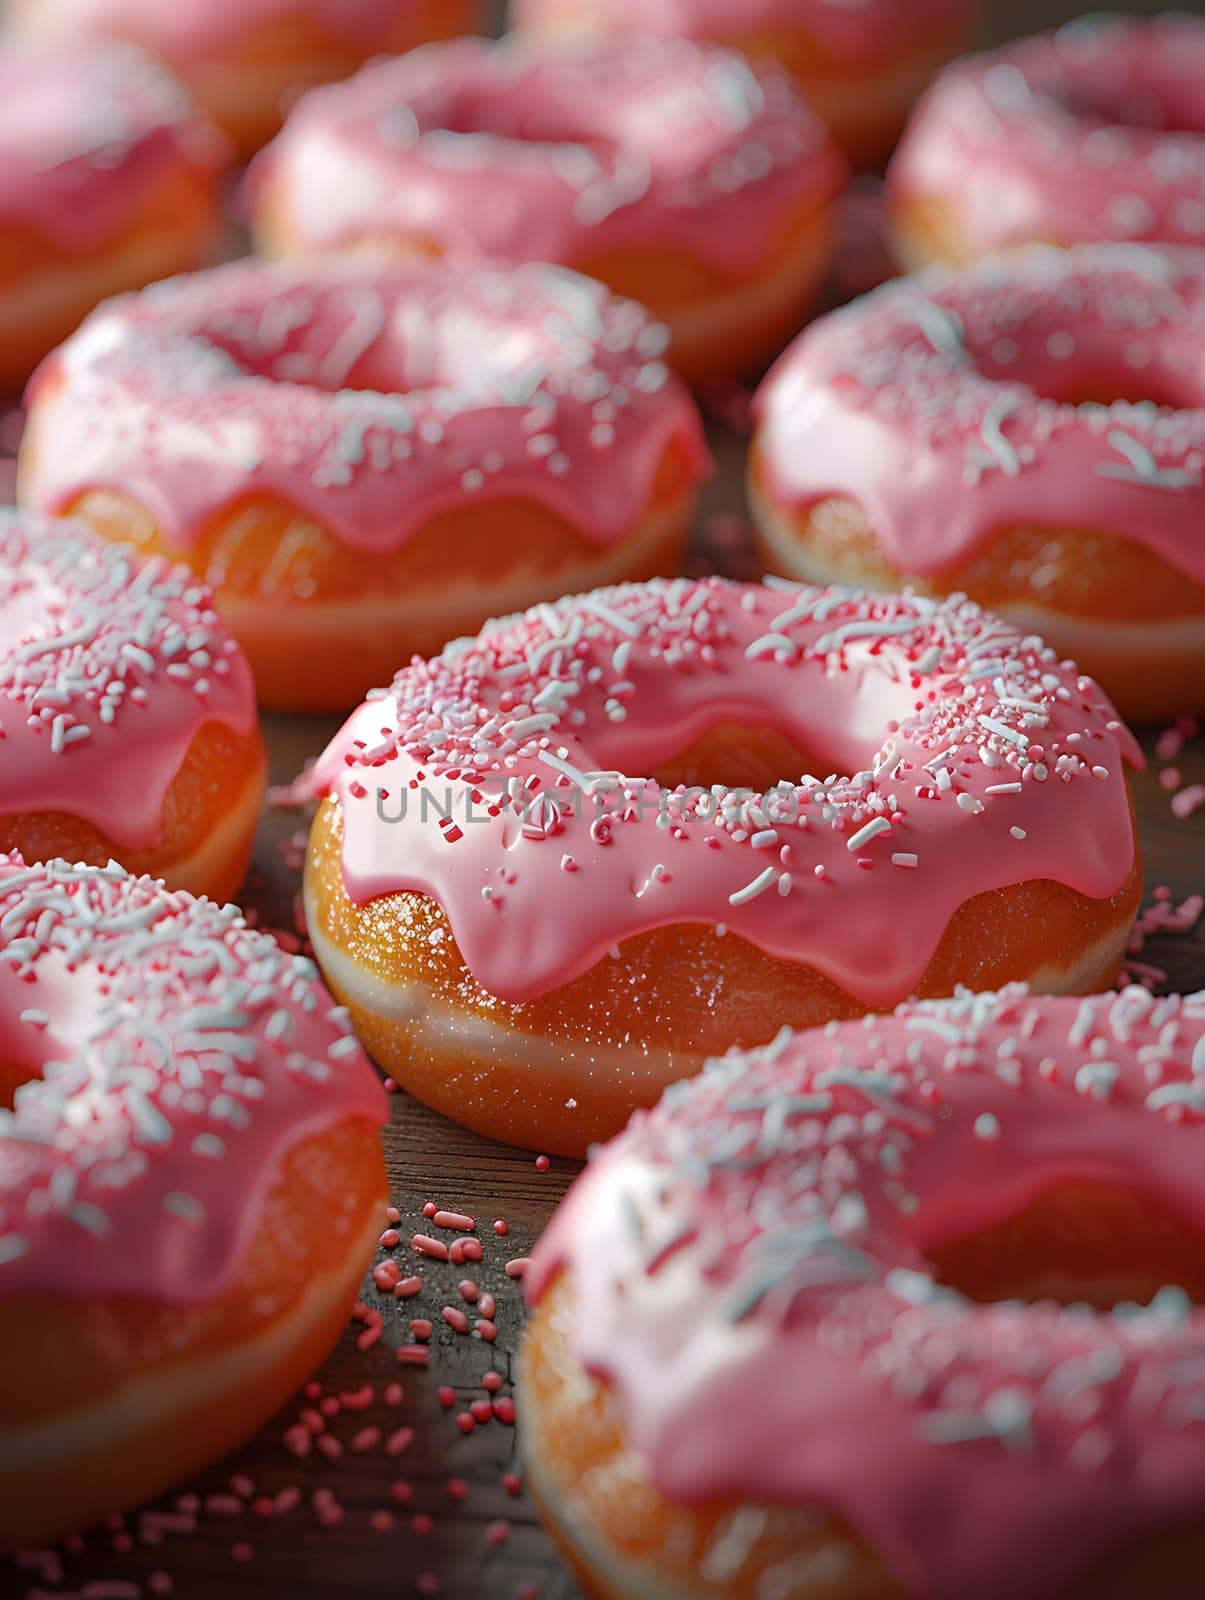 A delightful dessert made of fried dough, topped with pink frosting and sprinkles. Donuts are a popular finger food loved by many